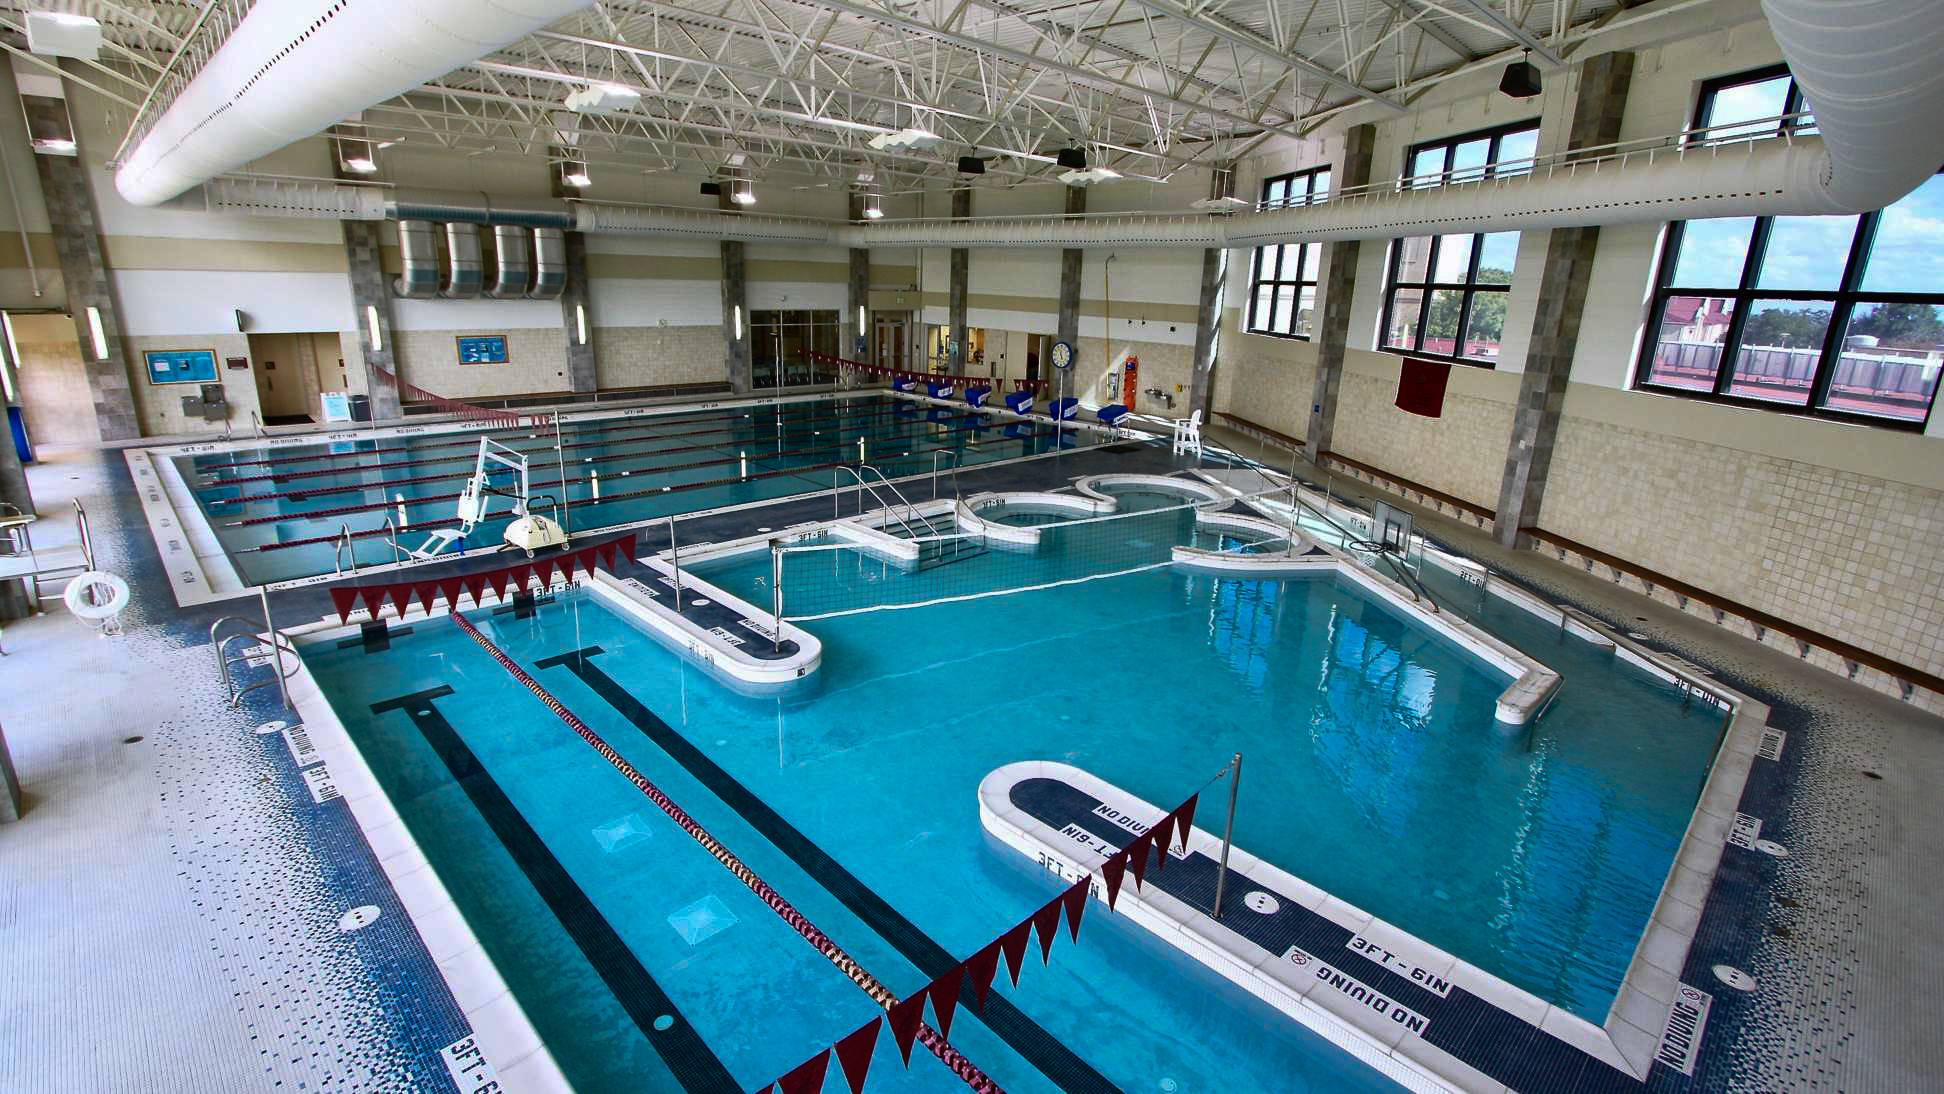 The Texas State Recreation Center Pools